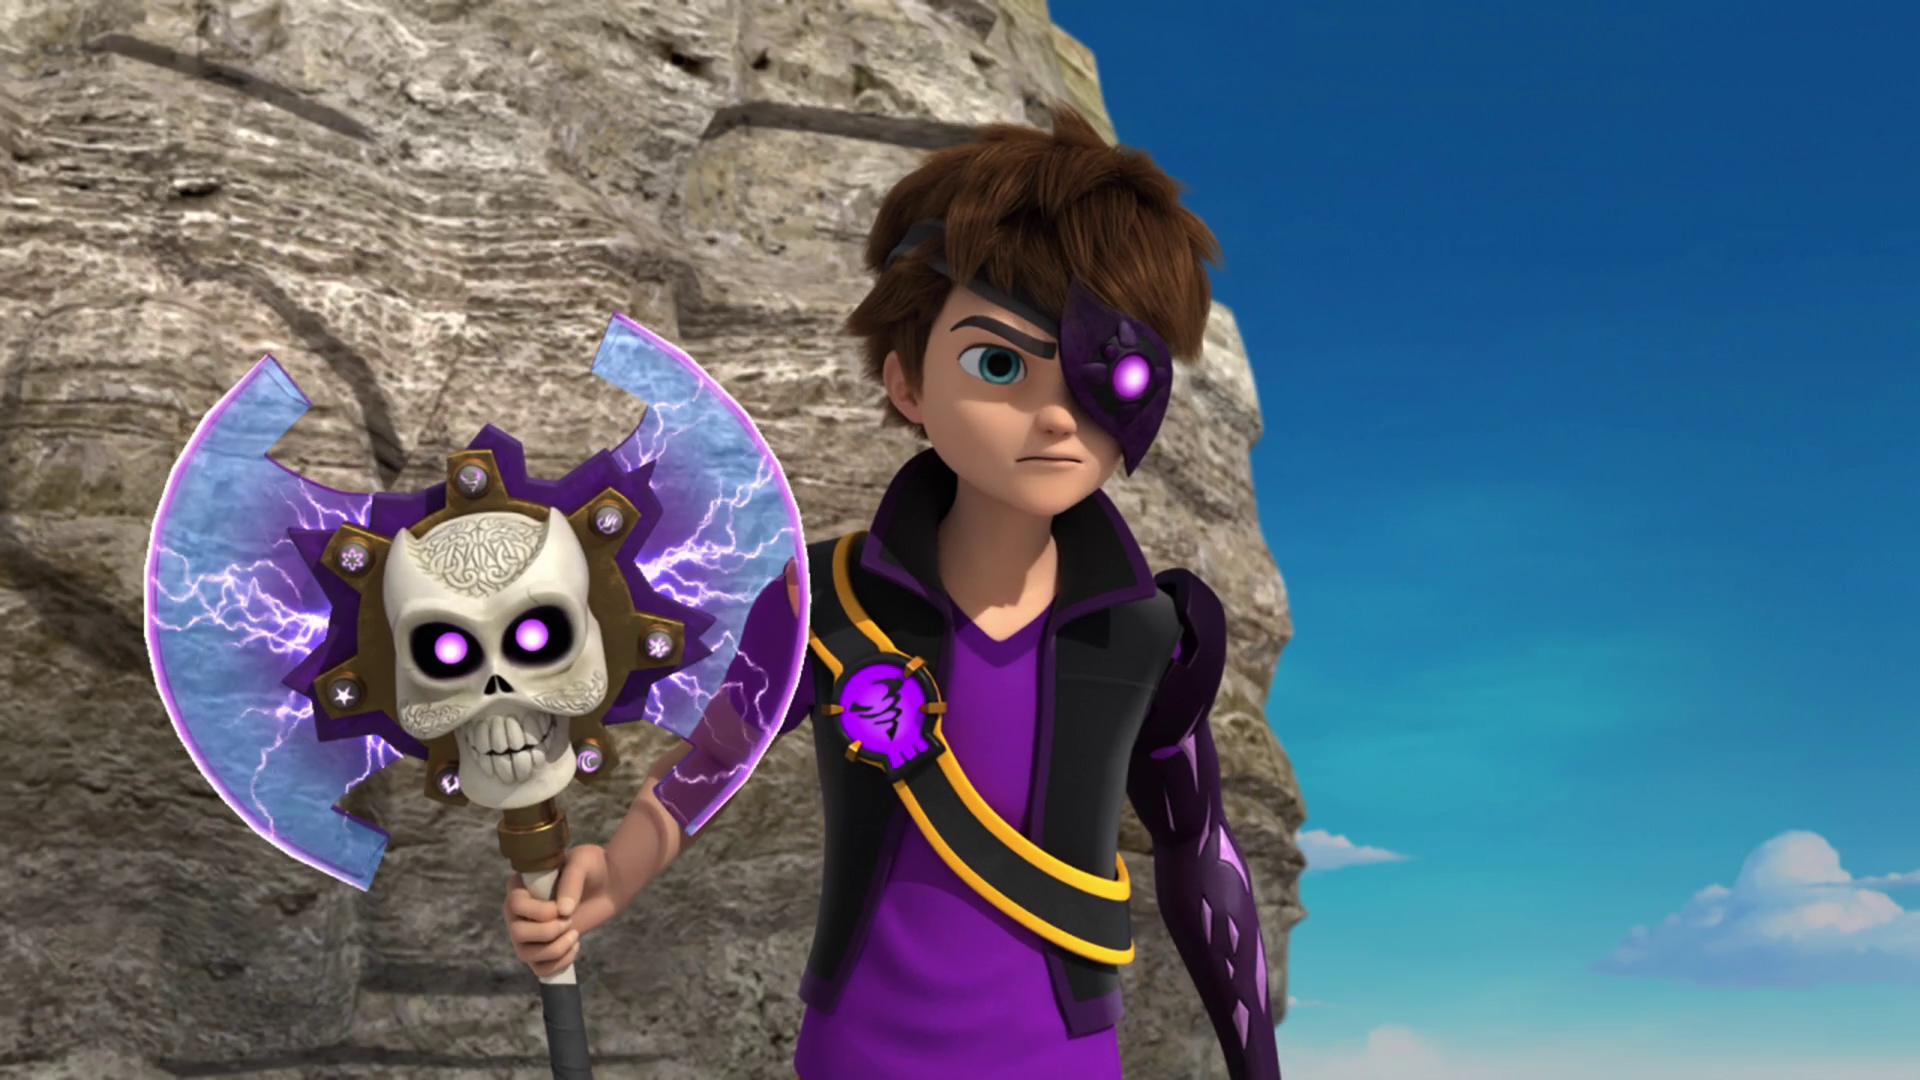 https://static.wikia.nocookie.net/zak-storm/images/6/62/Aeria1.png/revision/latest?cb=20181228054038